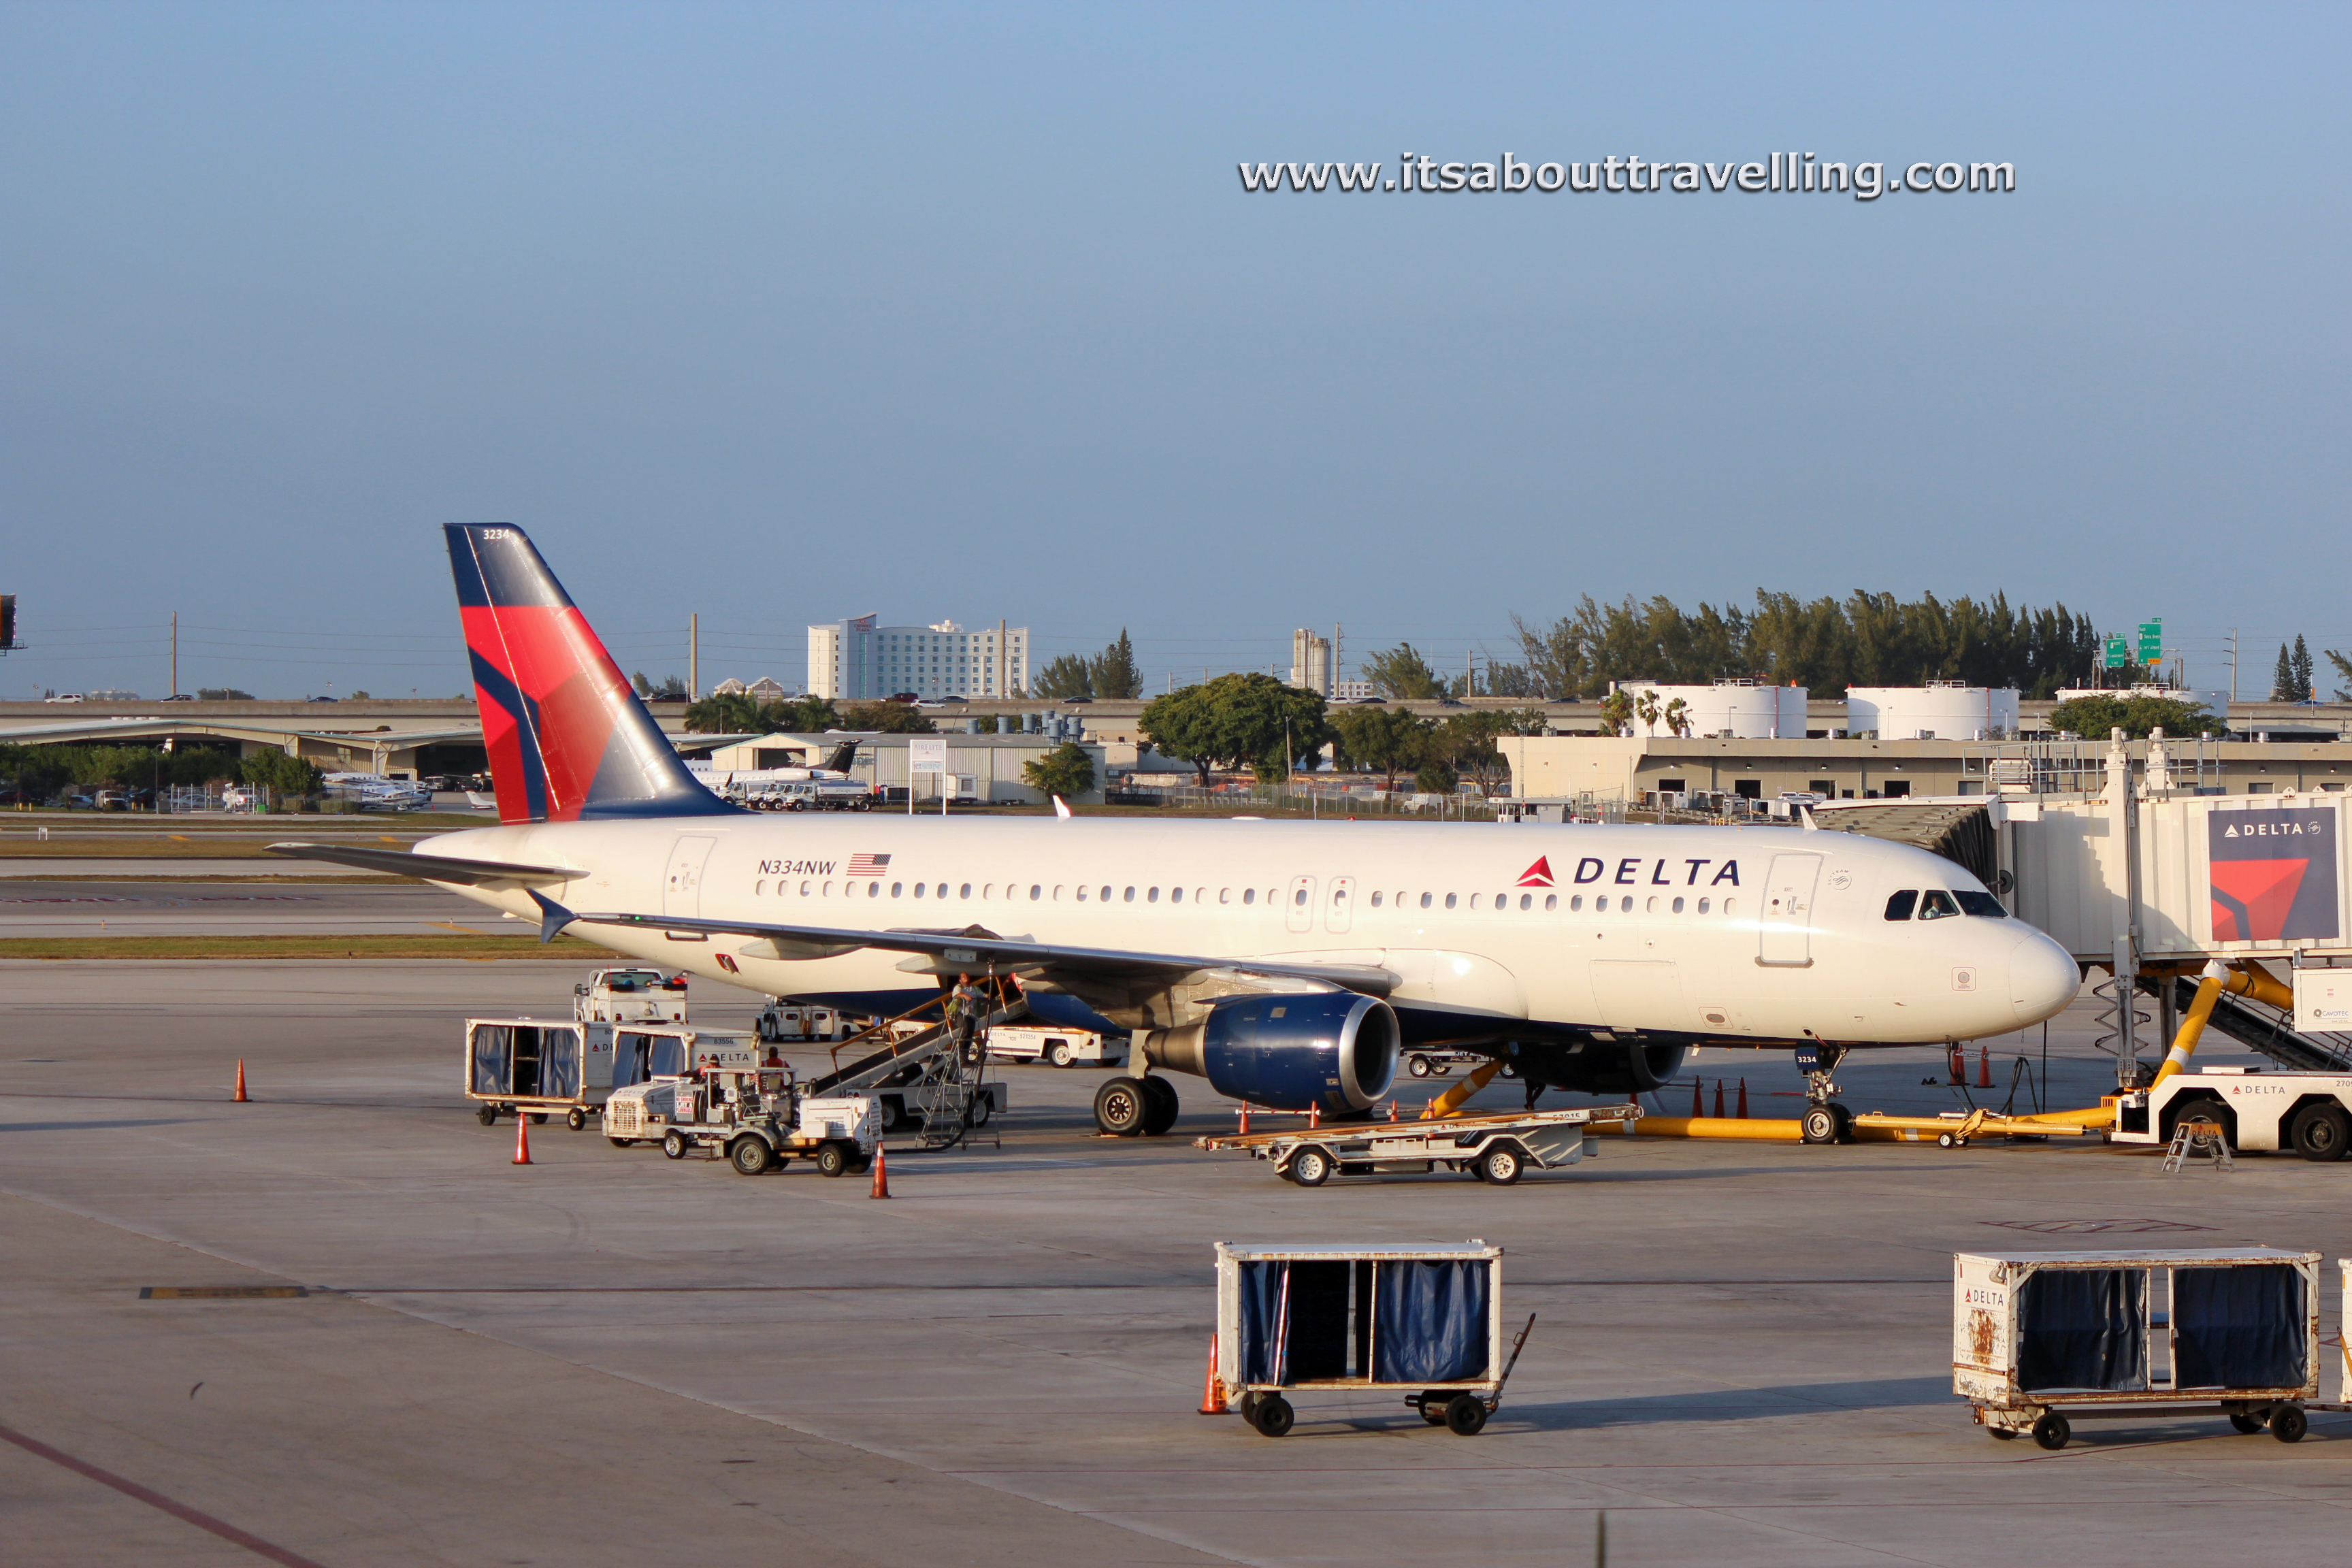 Plane Spotting at FLL (Ft. Lauderdale, Florida) - It's About Travelling